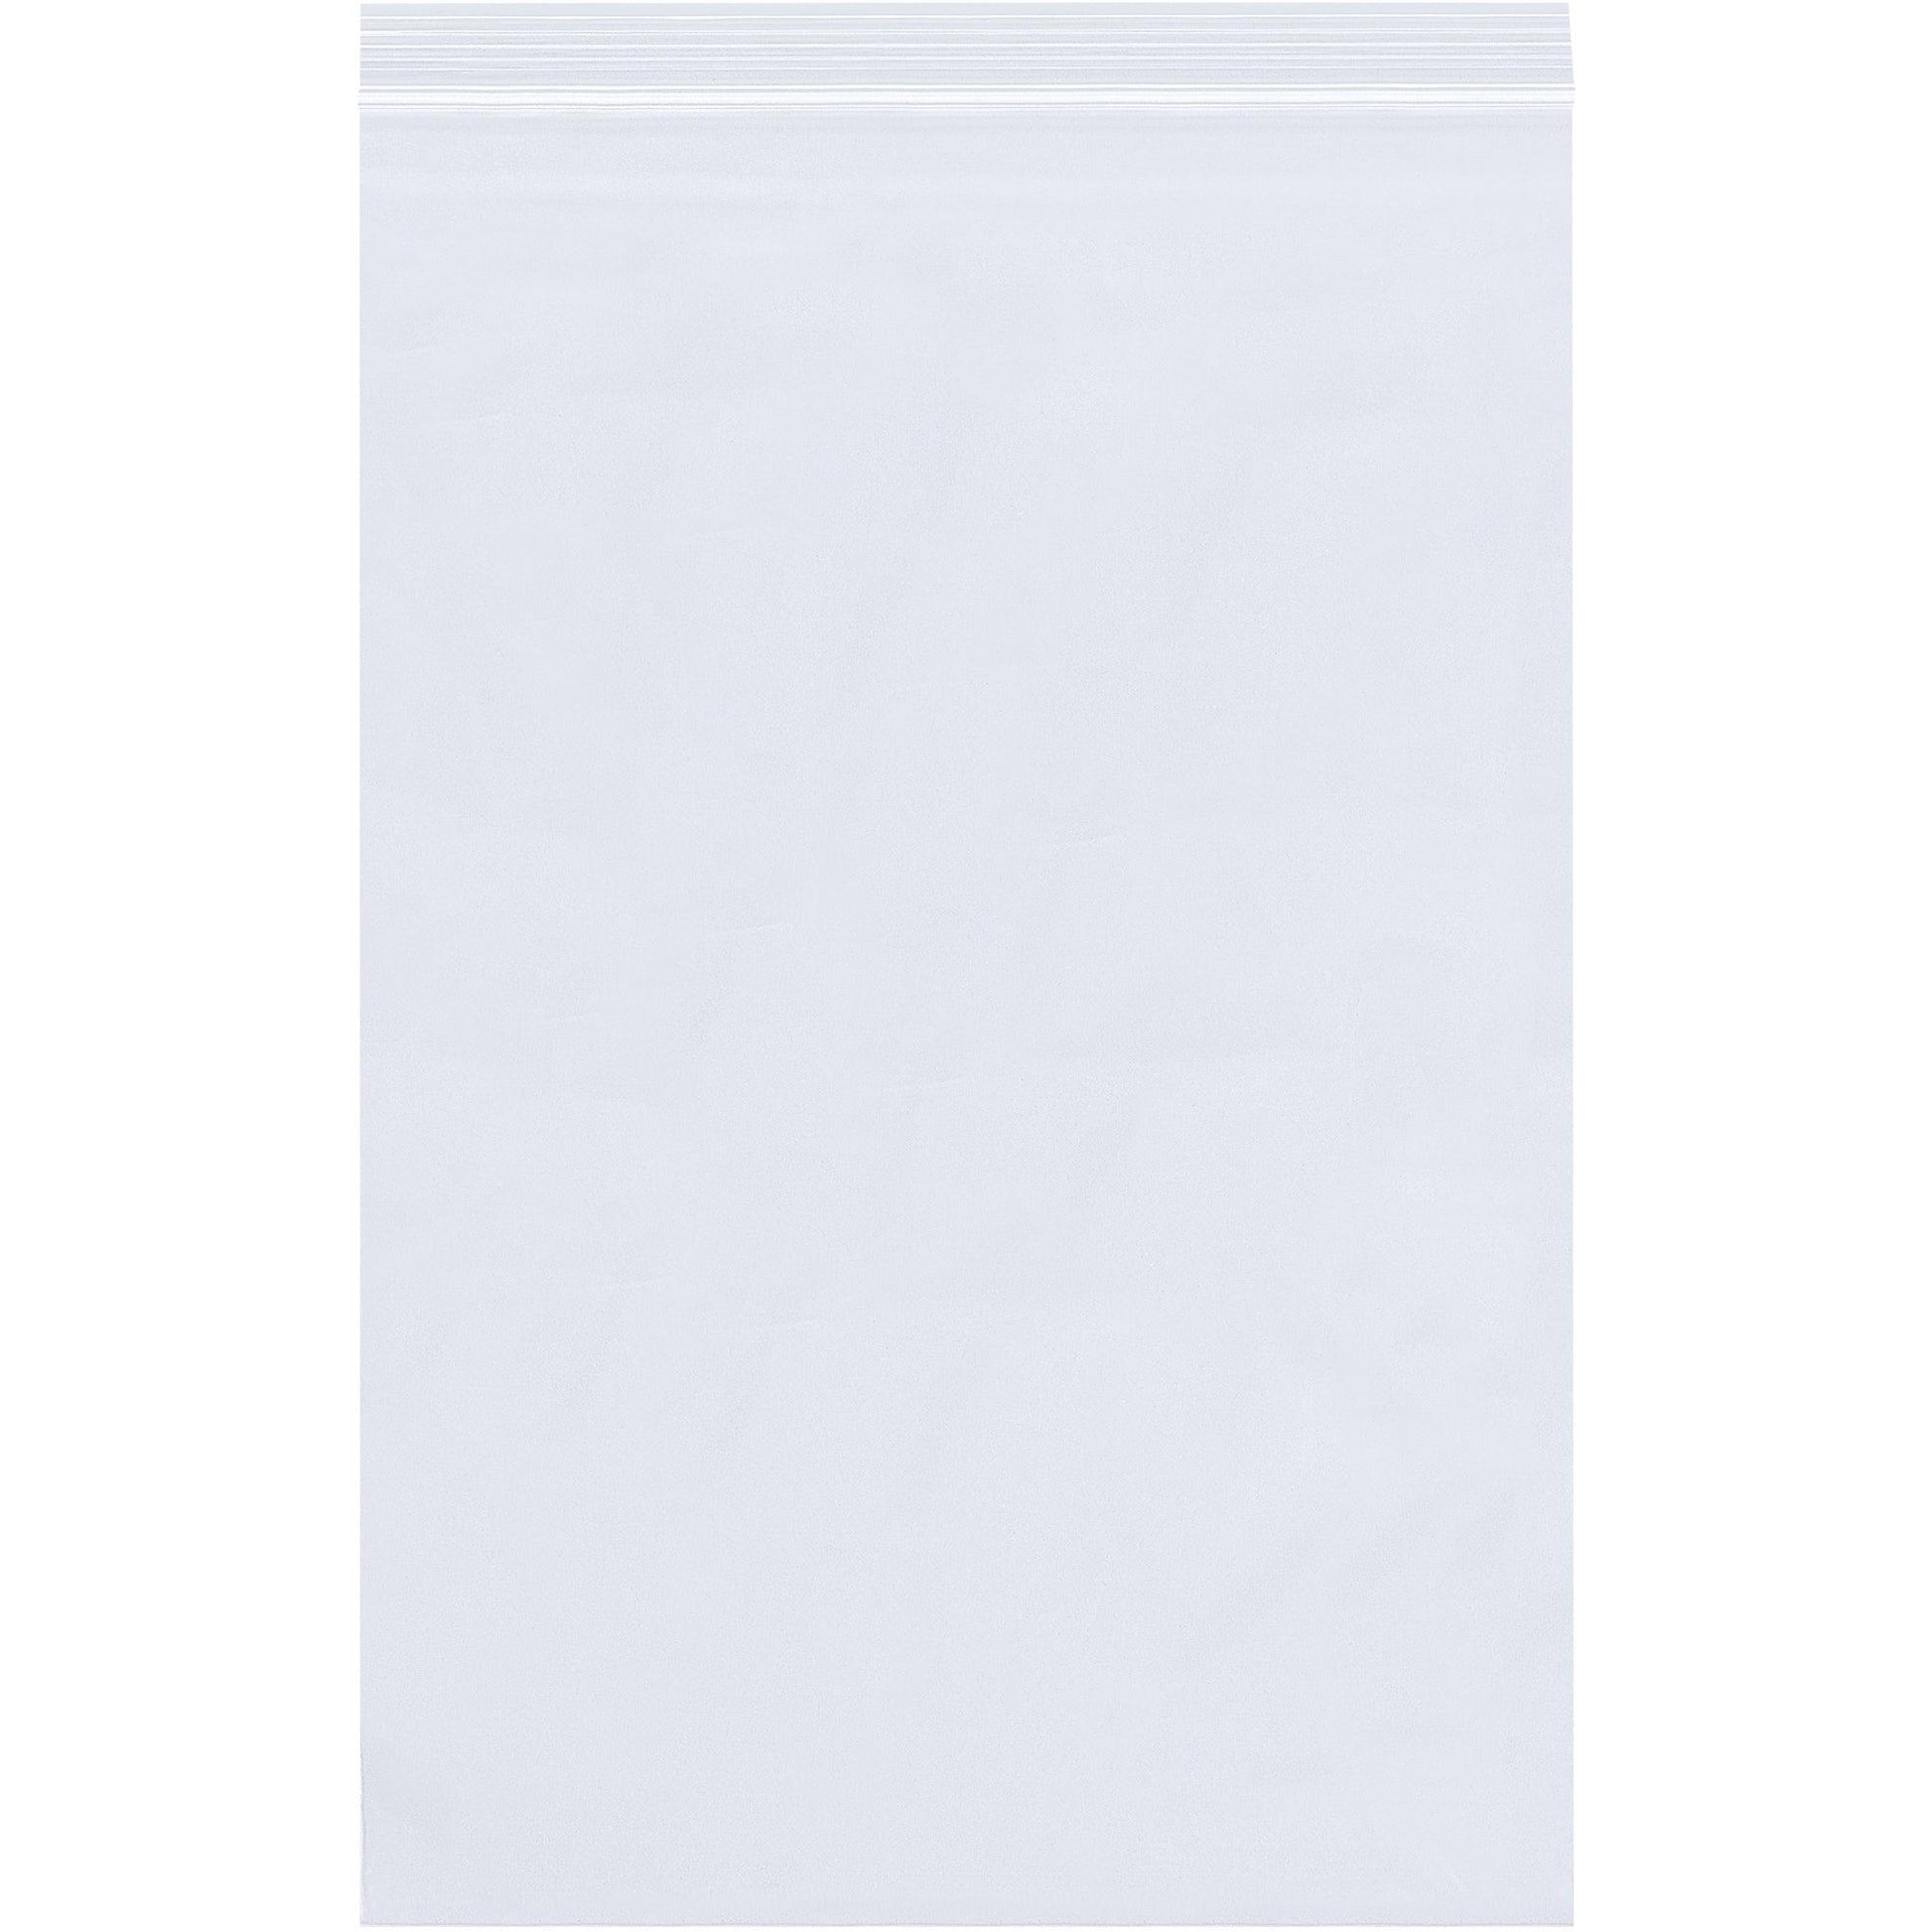 8 x 9" - 4 Mil Reclosable Poly Bags - PB4169